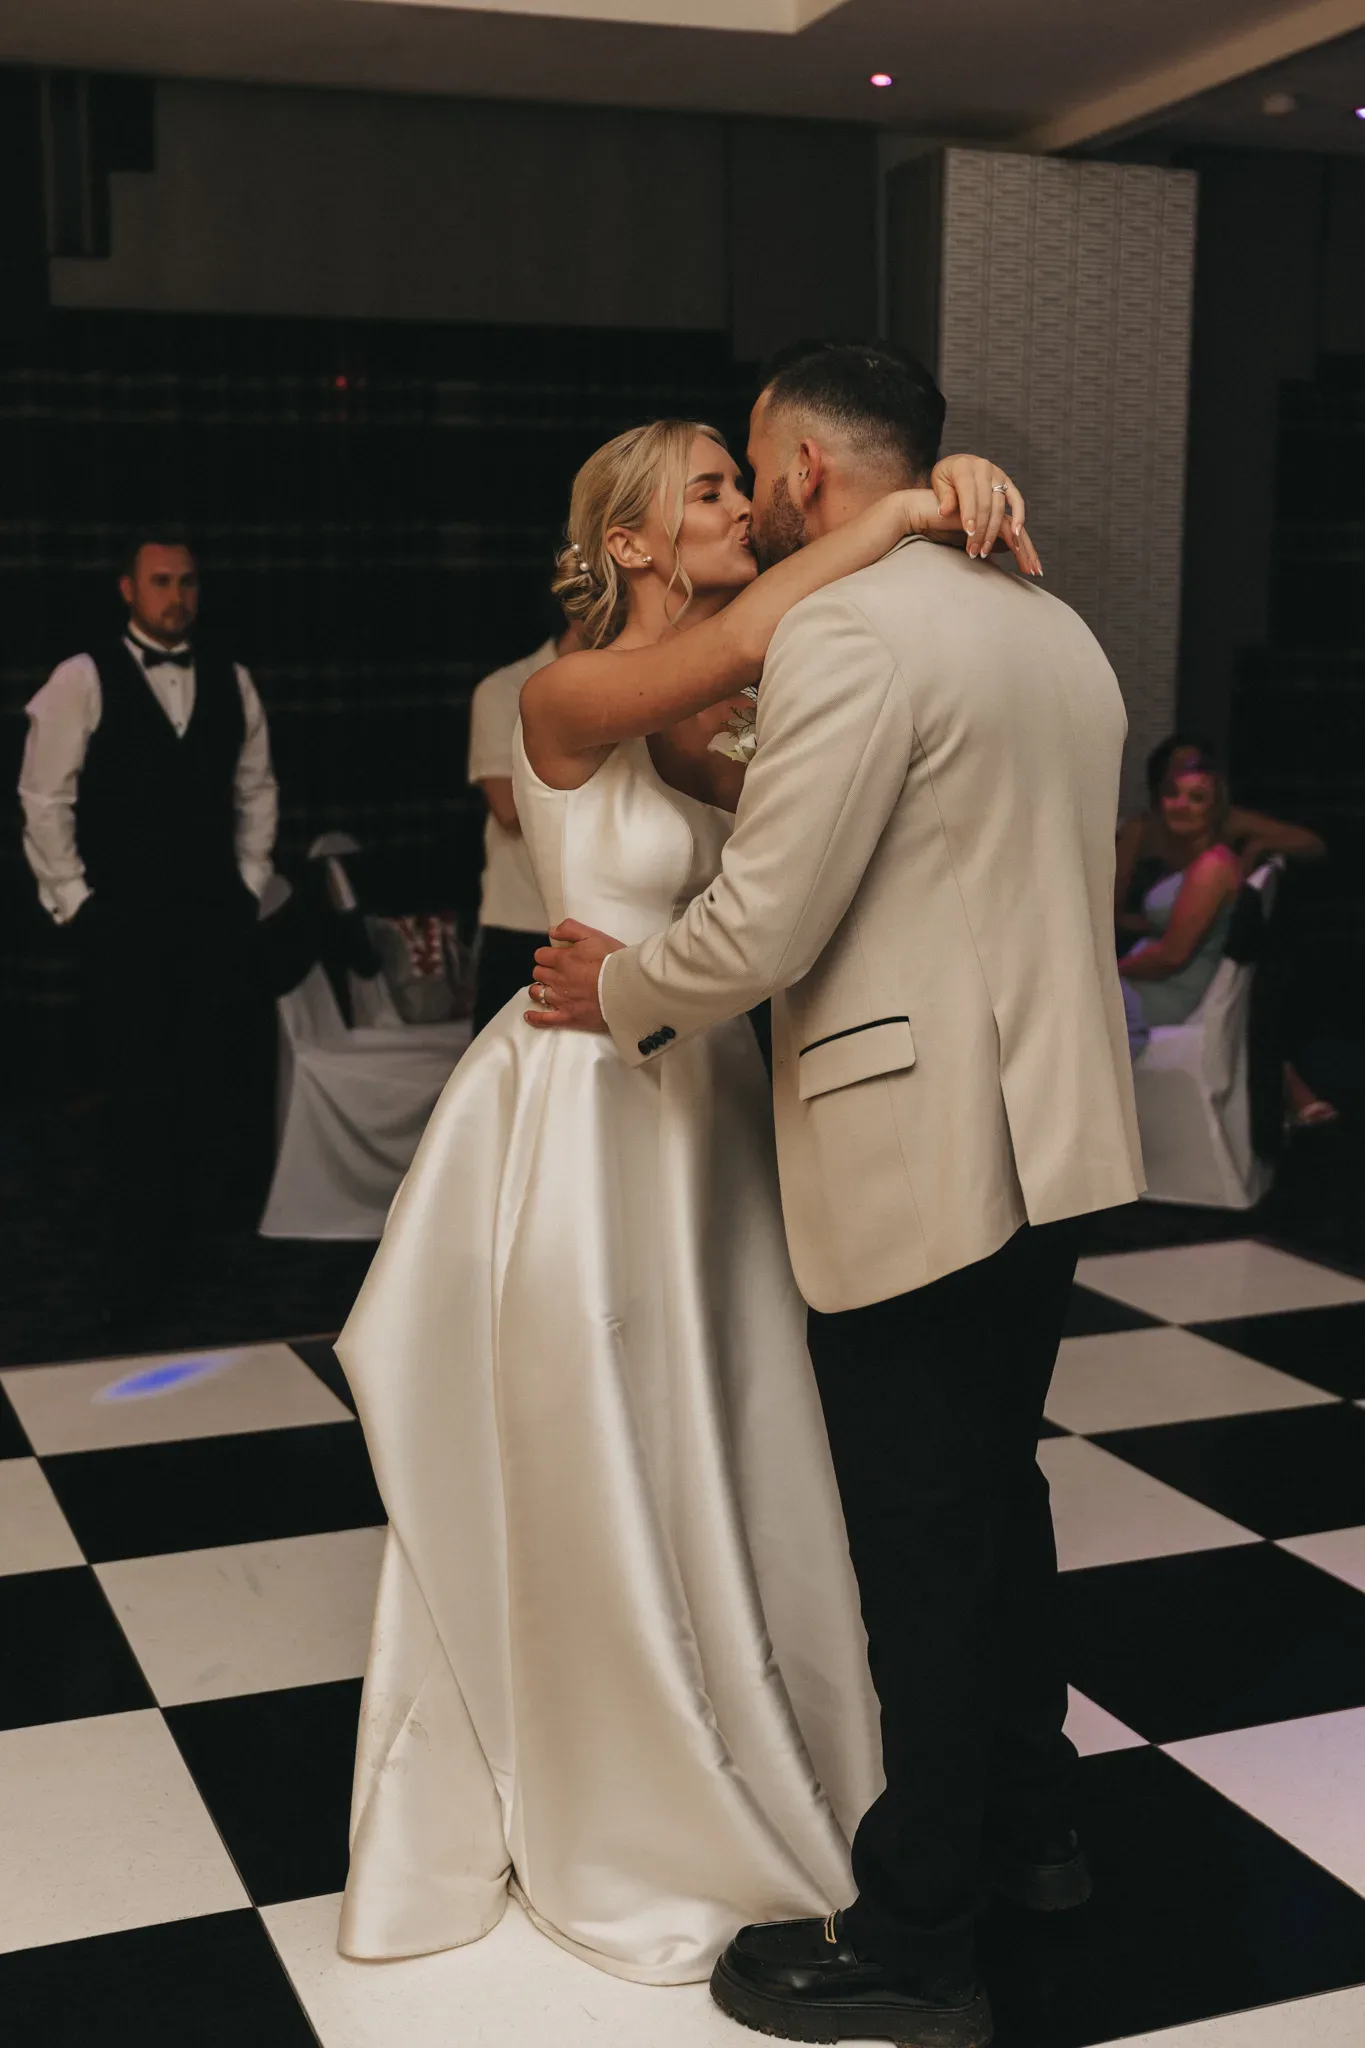 A bride in a white gown kisses a groom in a beige suit on a black and white checkered dance floor, with wedding guests in the background.